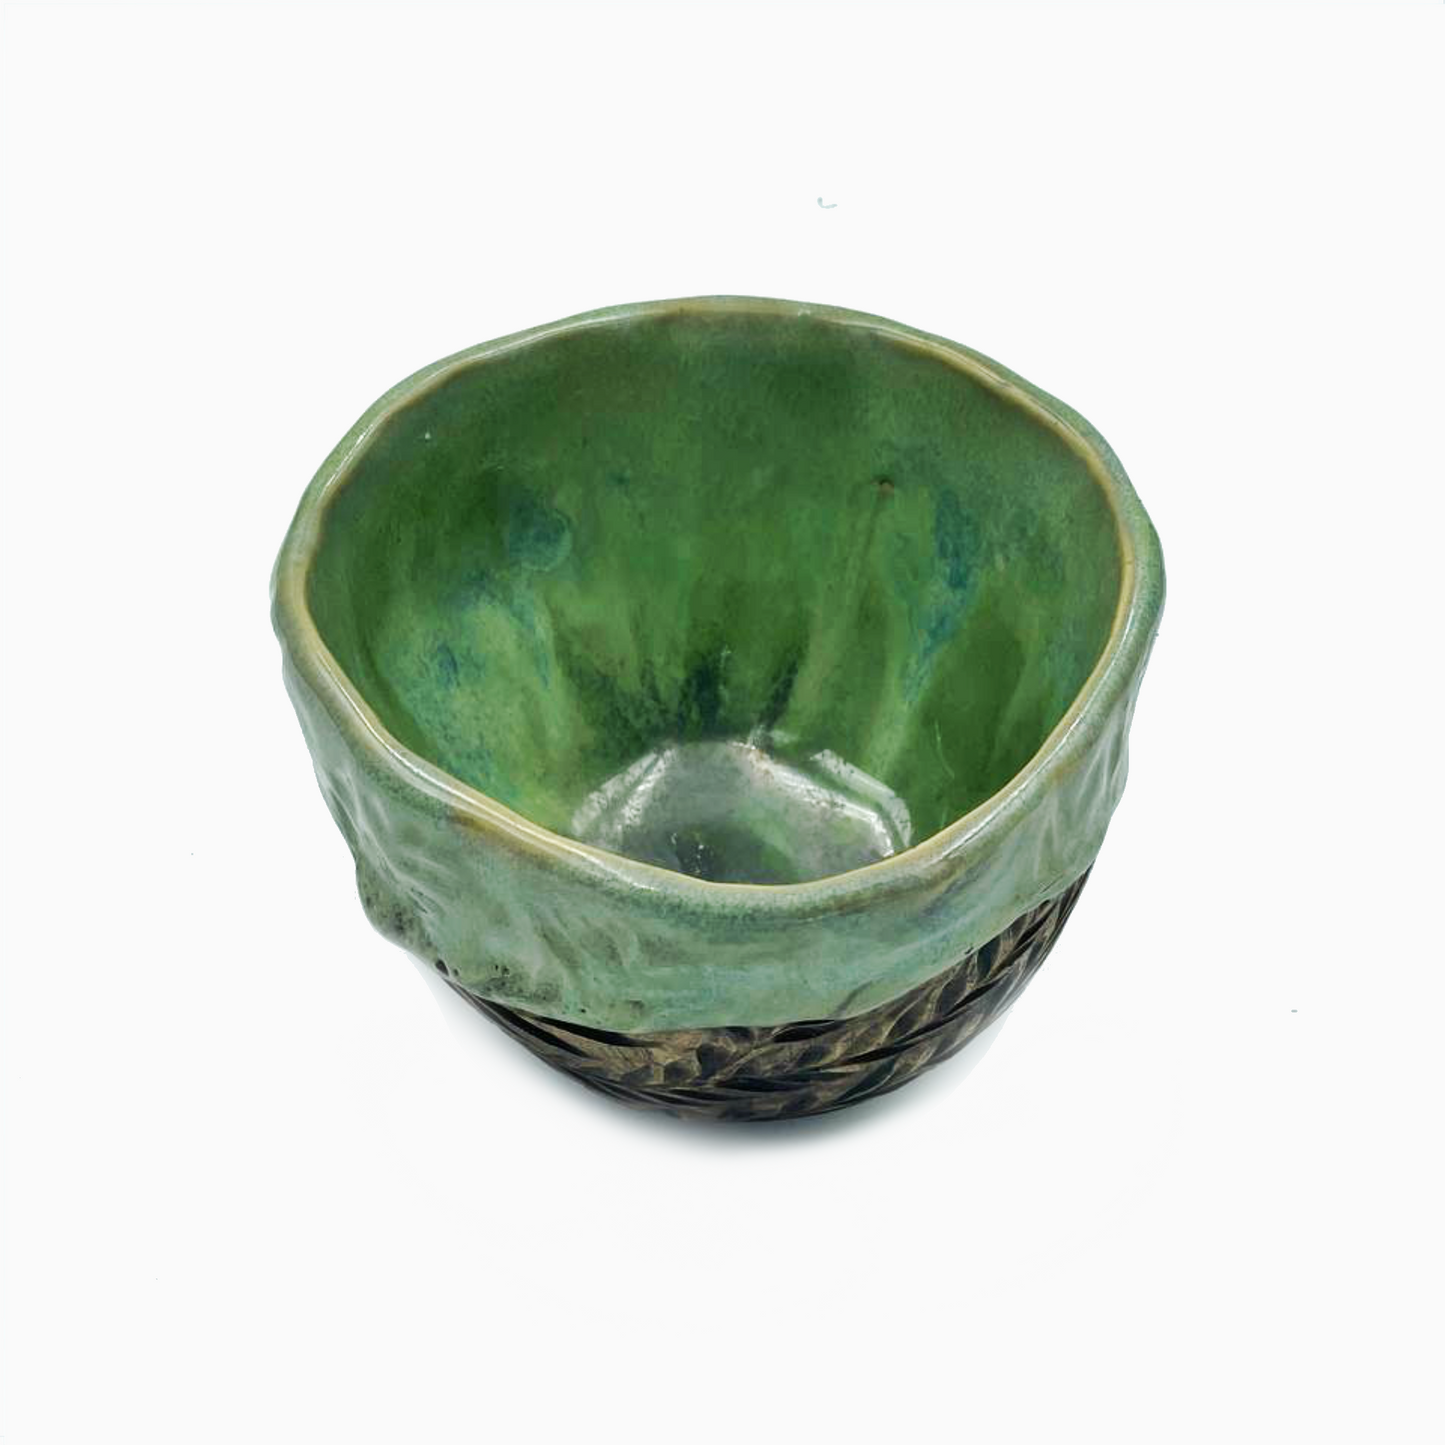 Secret of the Woods - Green Cup with Fern Pattern